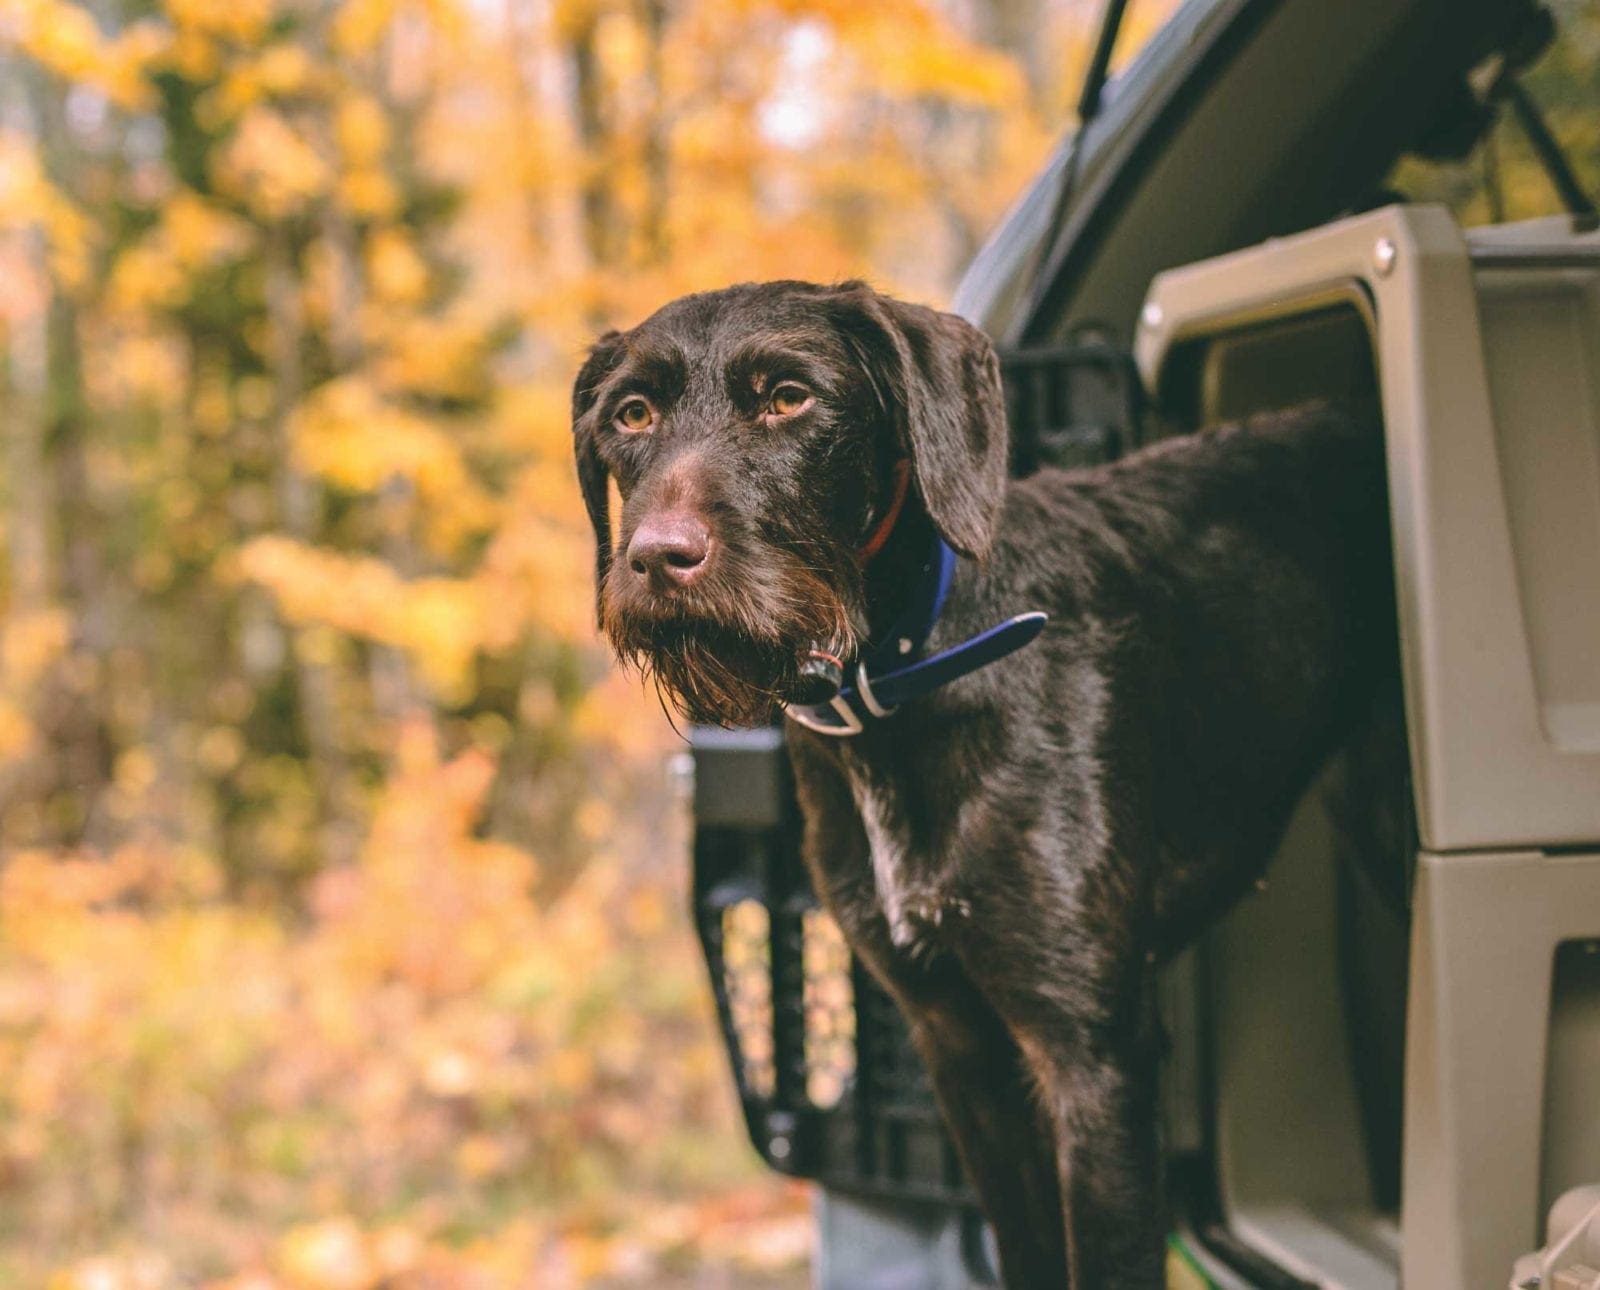 A Gunner Kennels G1 dog crate during a grouse hunt in Minnesota.